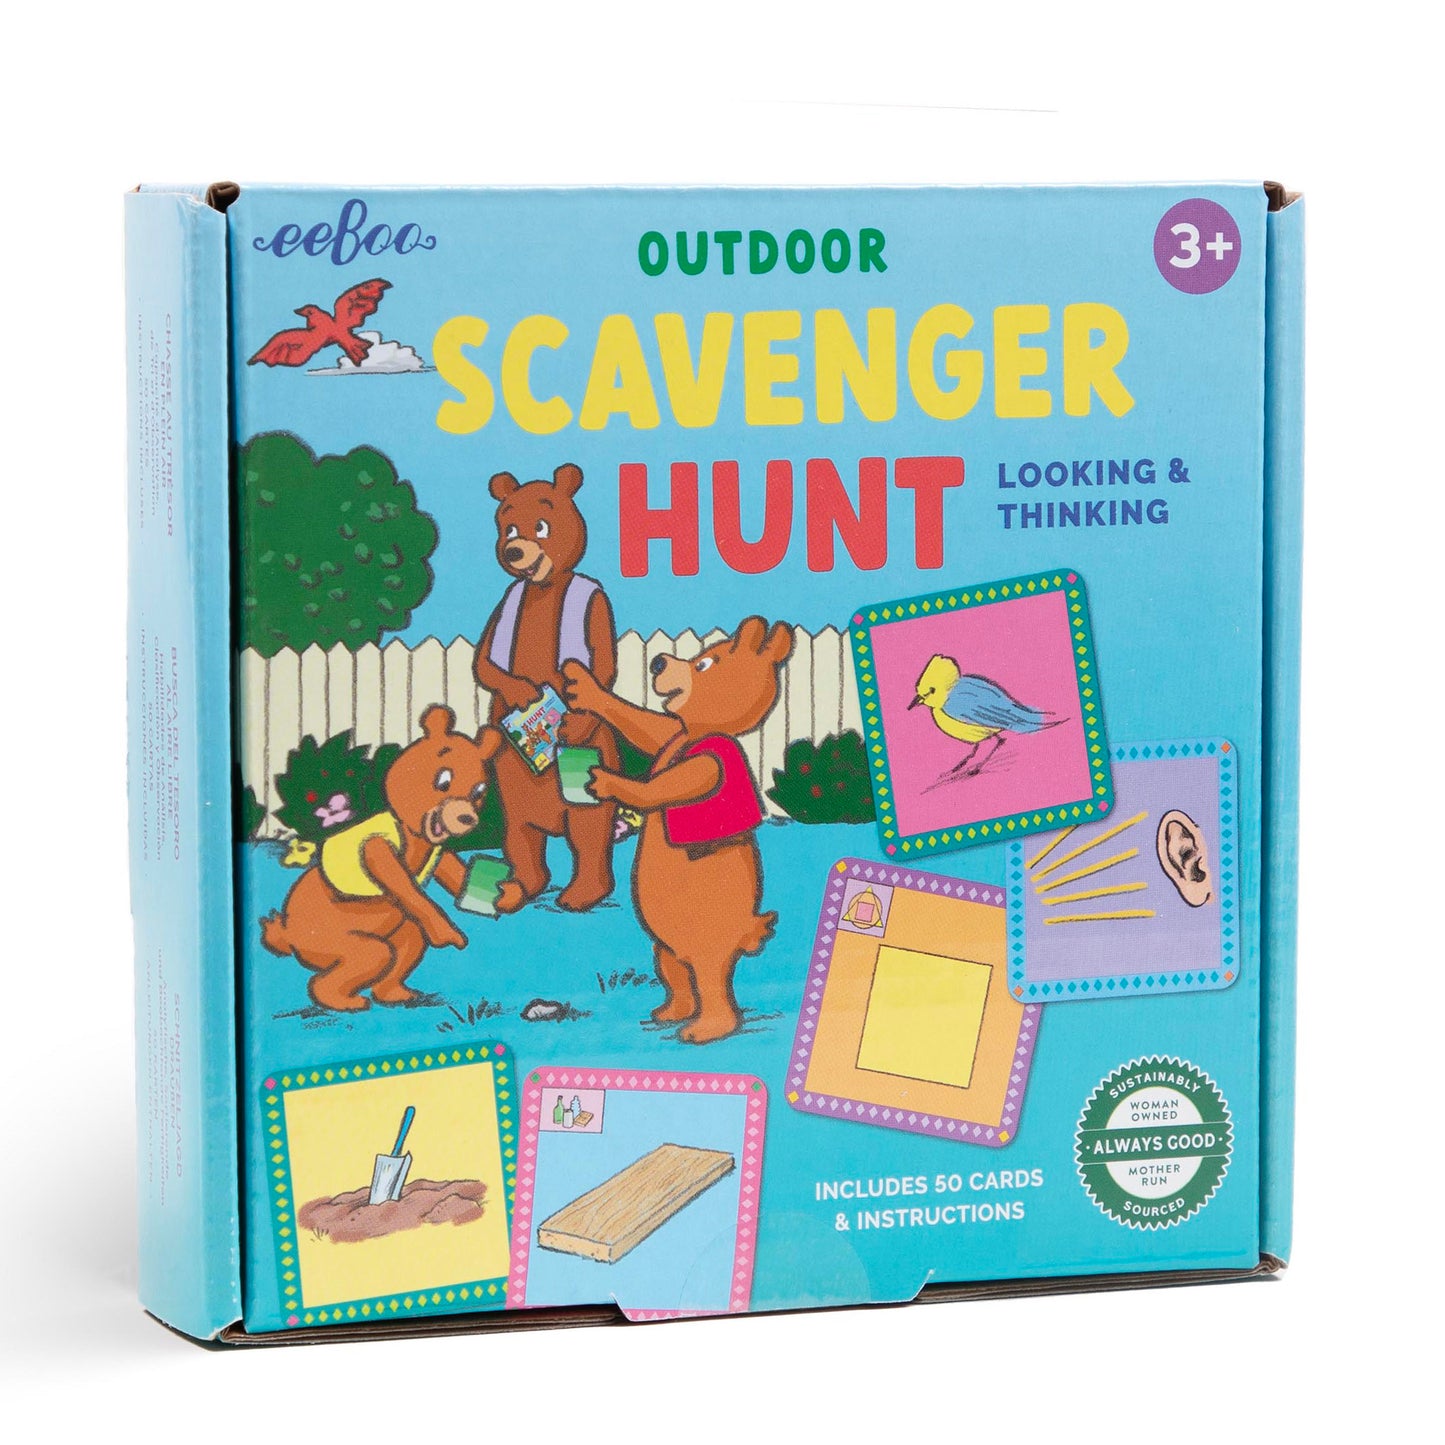 Outdoor Scavenger Hunt Seek and Find Game by eeBoo for Kids Ages 3+ | Builds Observational and Analytical Skills